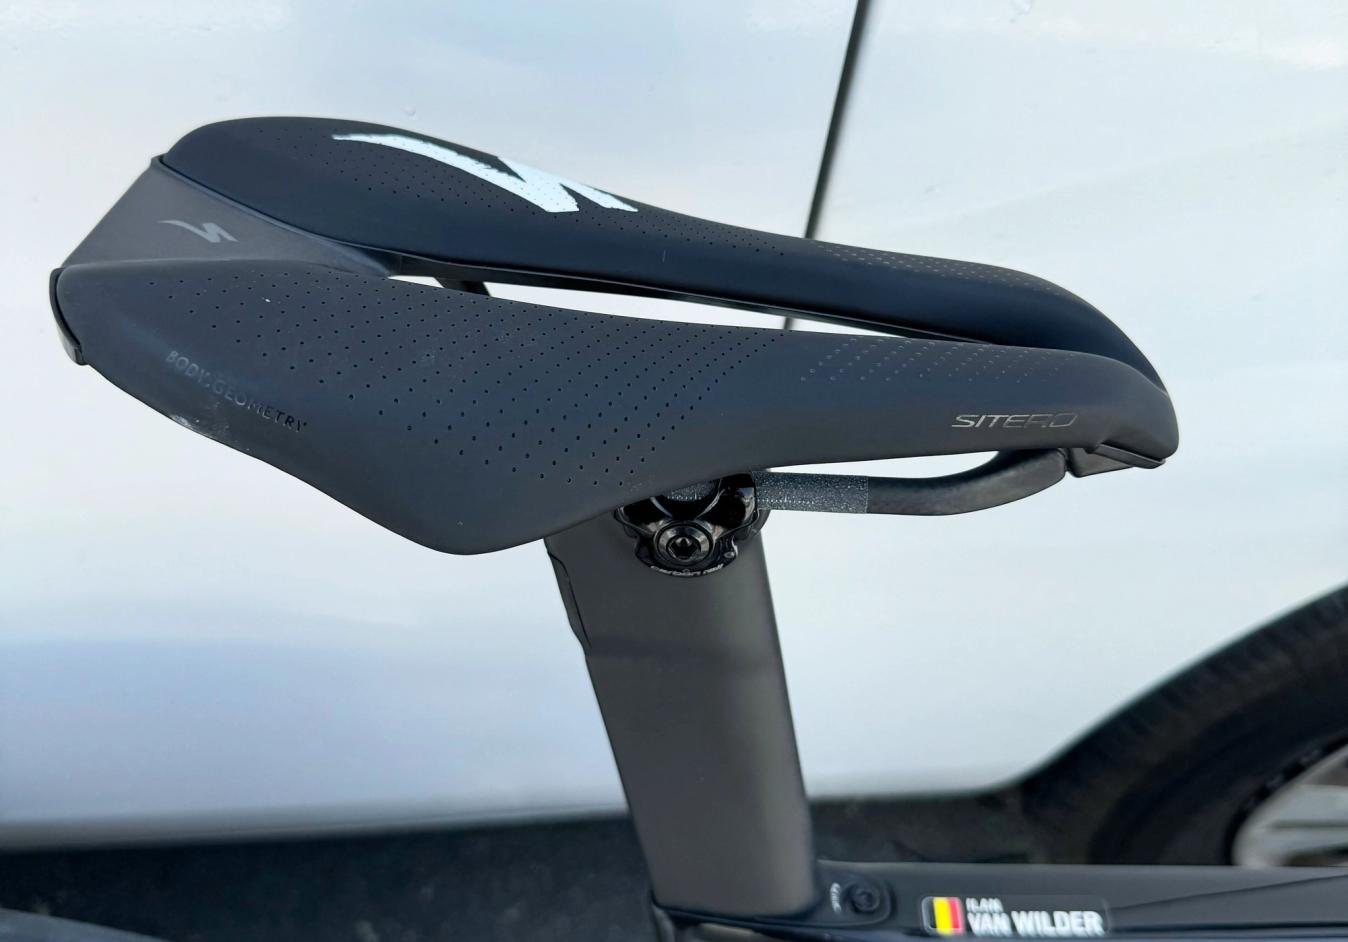 All of the components so far are optimised for aerodynamics, but to achieve an aerodynamic body position, the riders need the right saddle. Most riders use a short-nosed saddle, like this Specialized Sitero, to allow them to rock their hips forward.